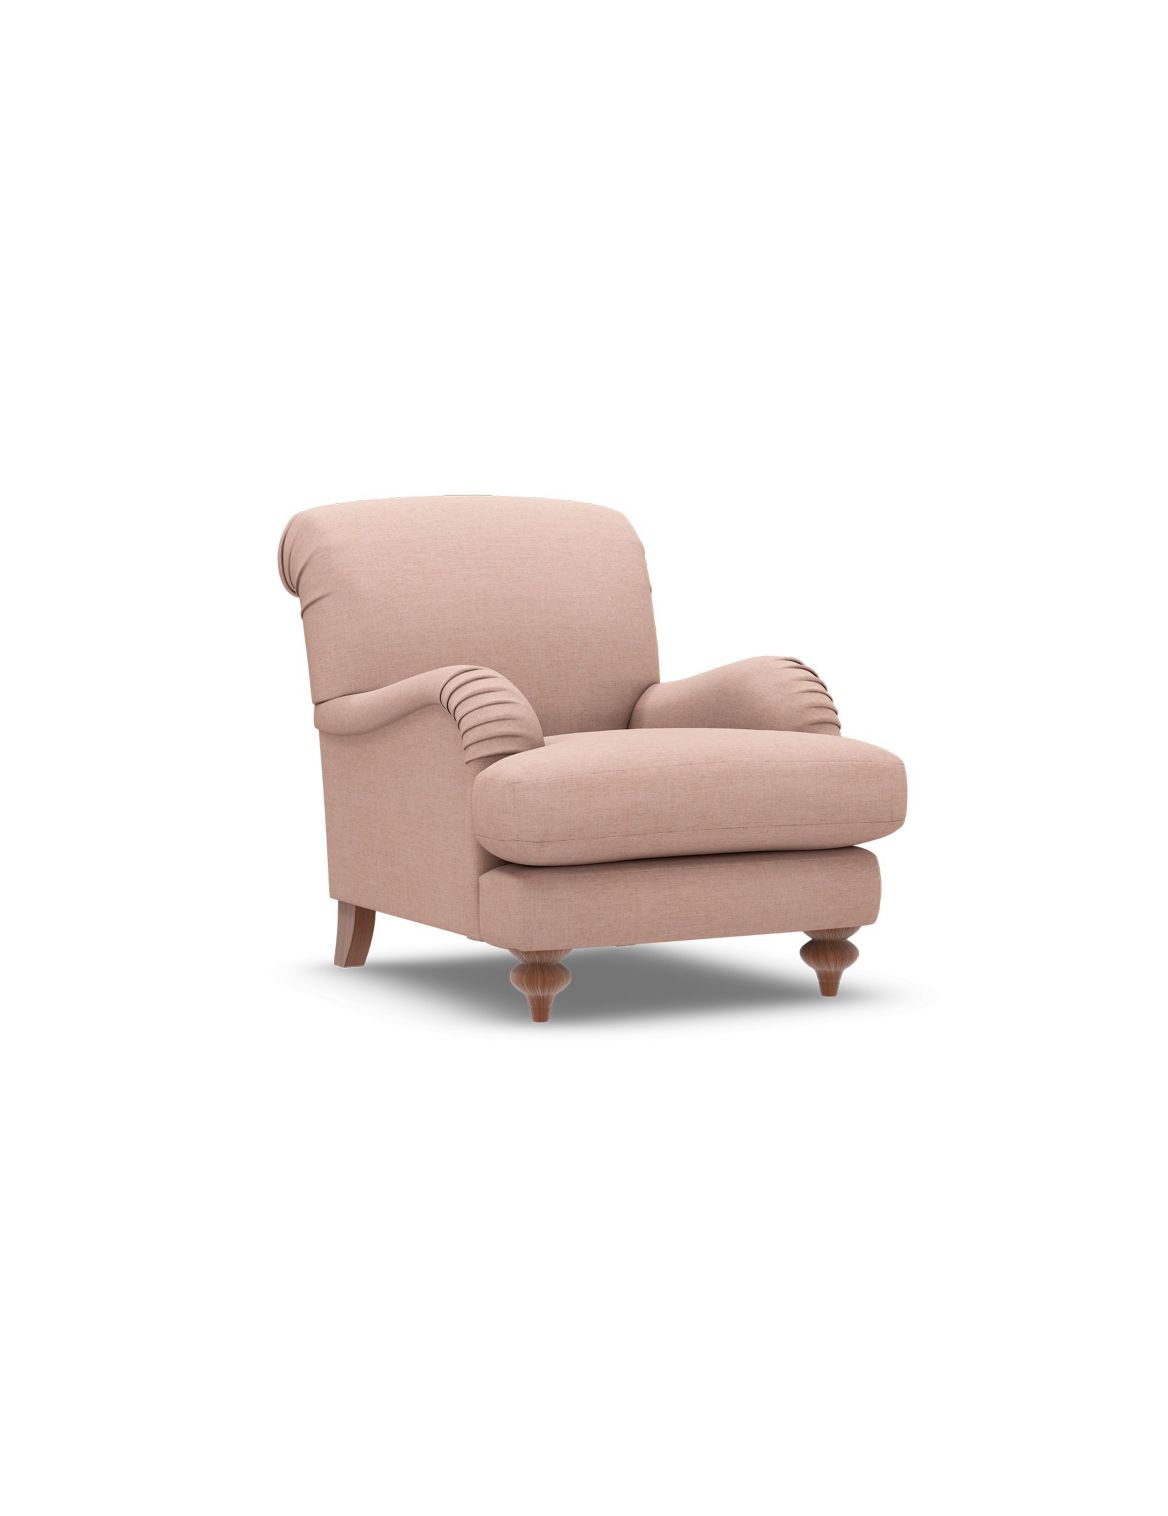 Isabelle Armchair pink